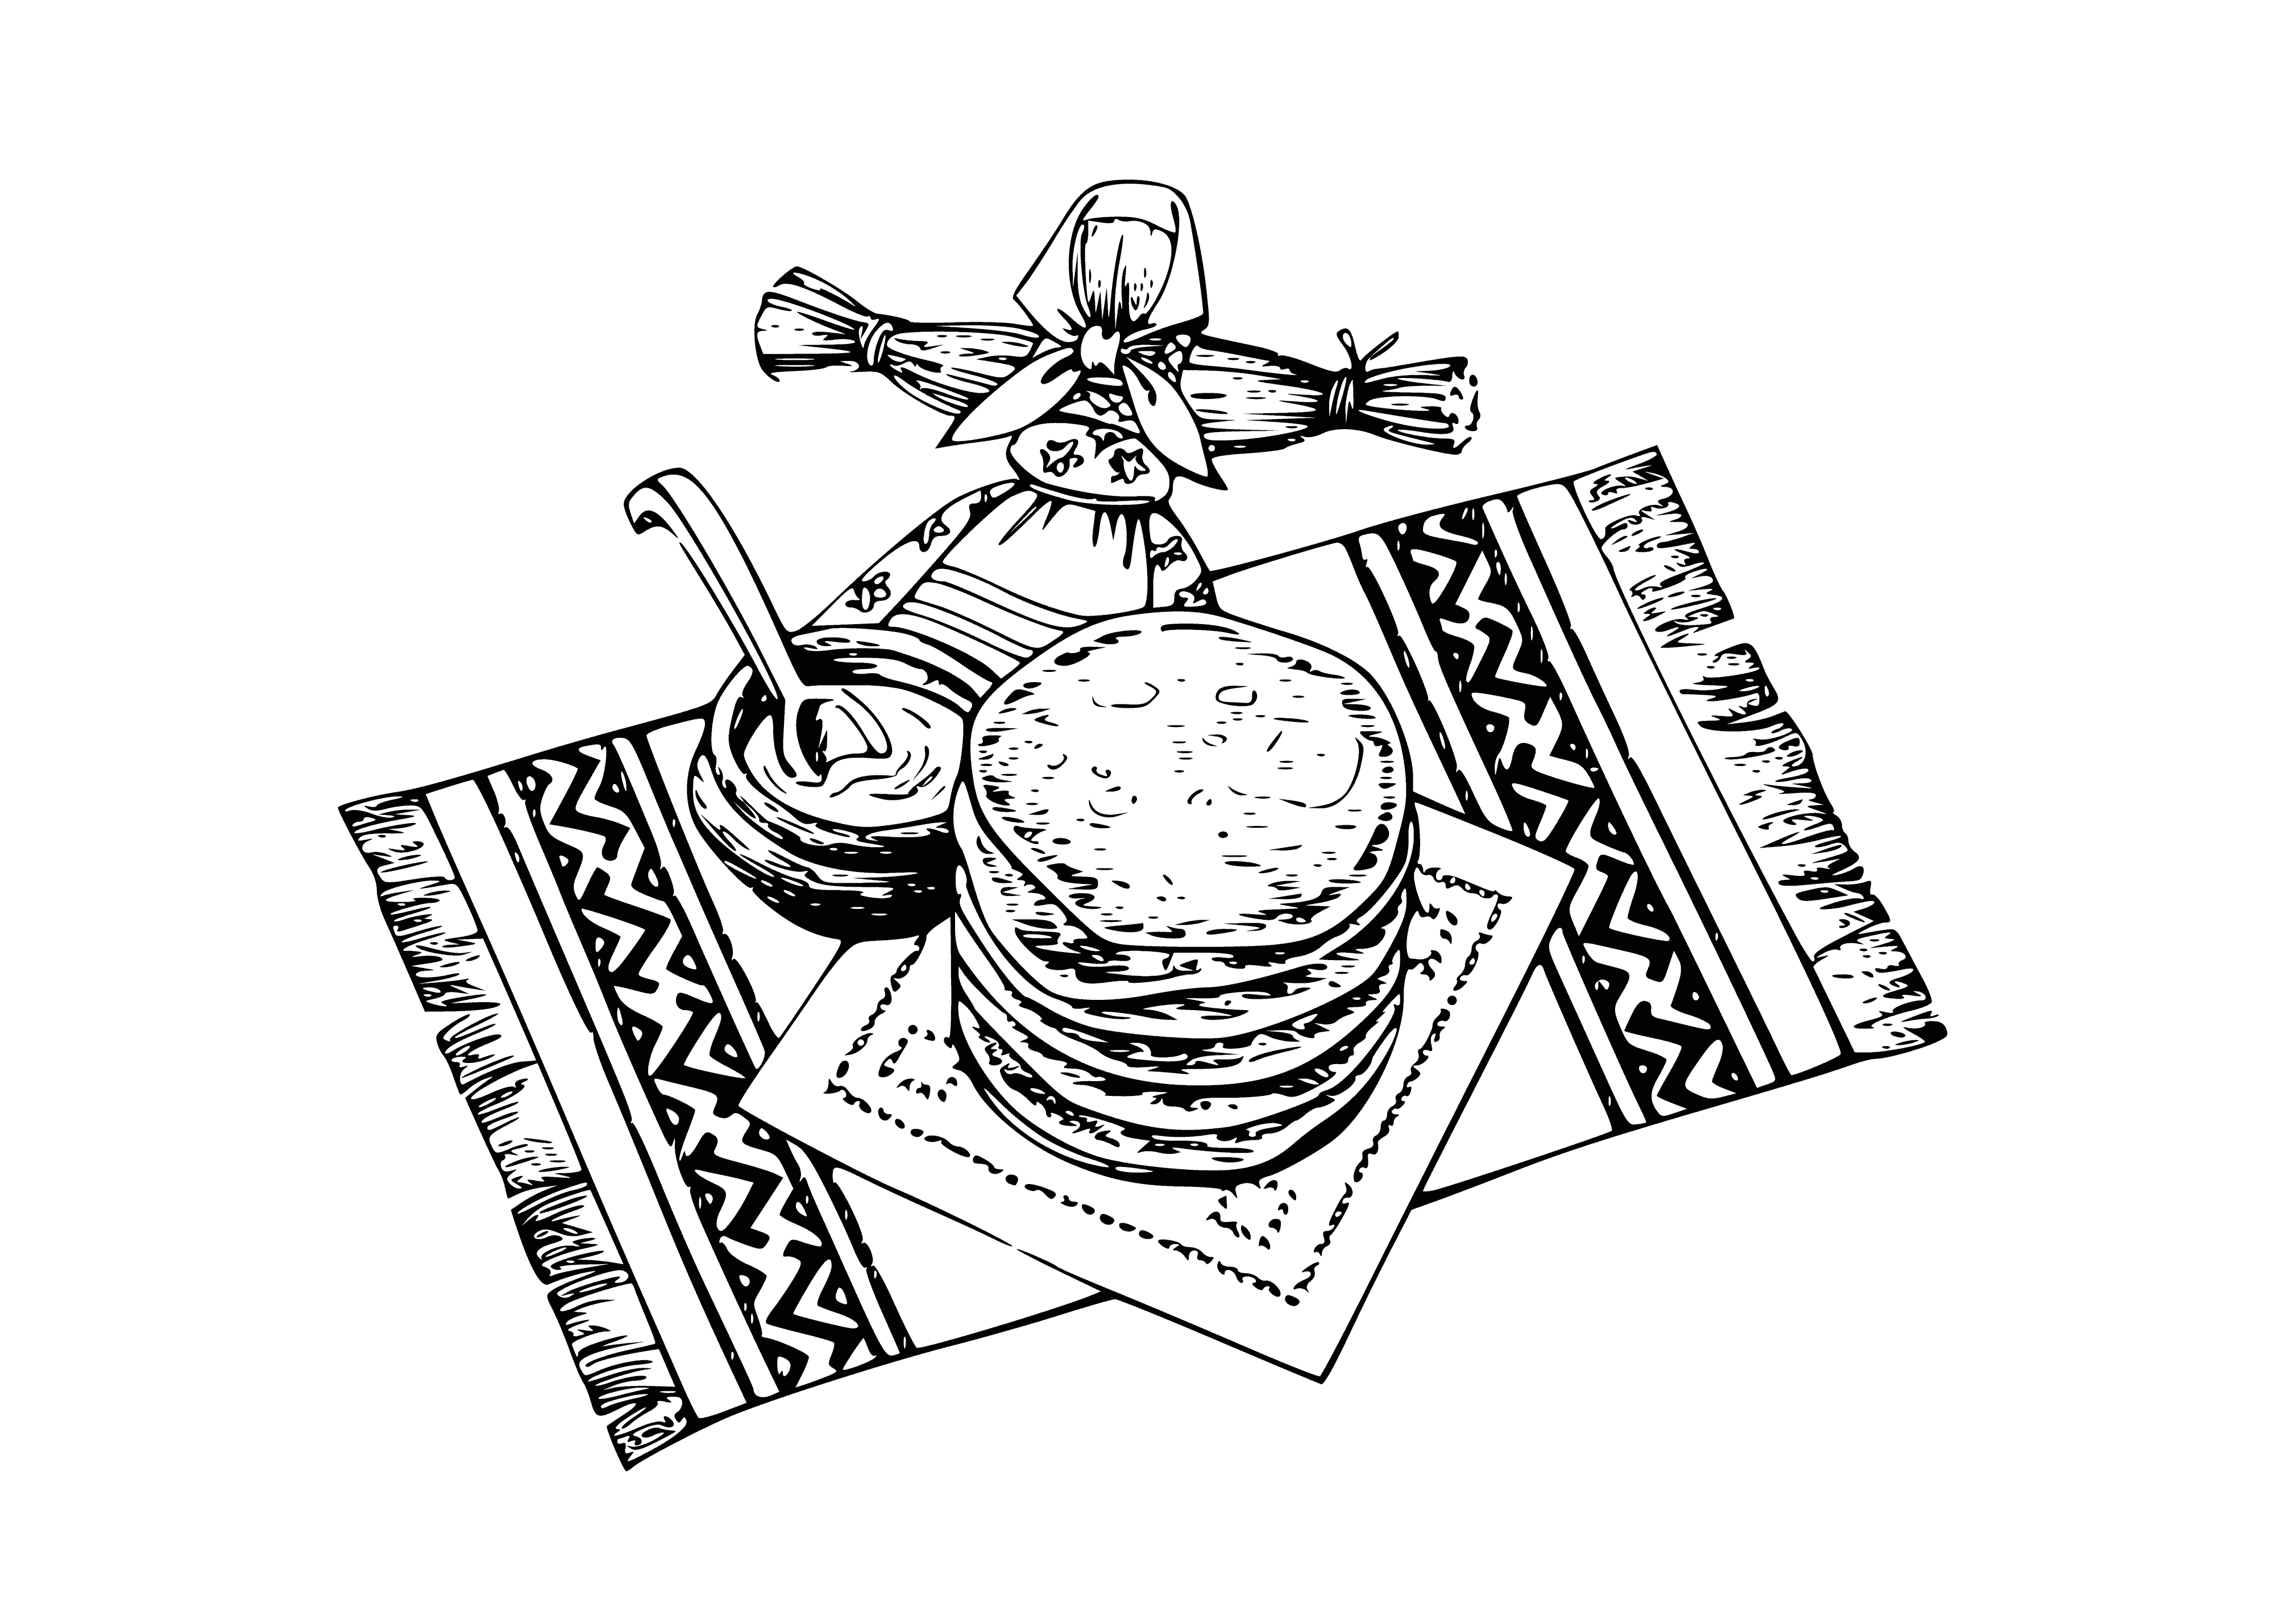 coloring page: Coloring page of woman cooking pancakes while text reads "Pancake Week - Shrovetide". Have fun during the festival!